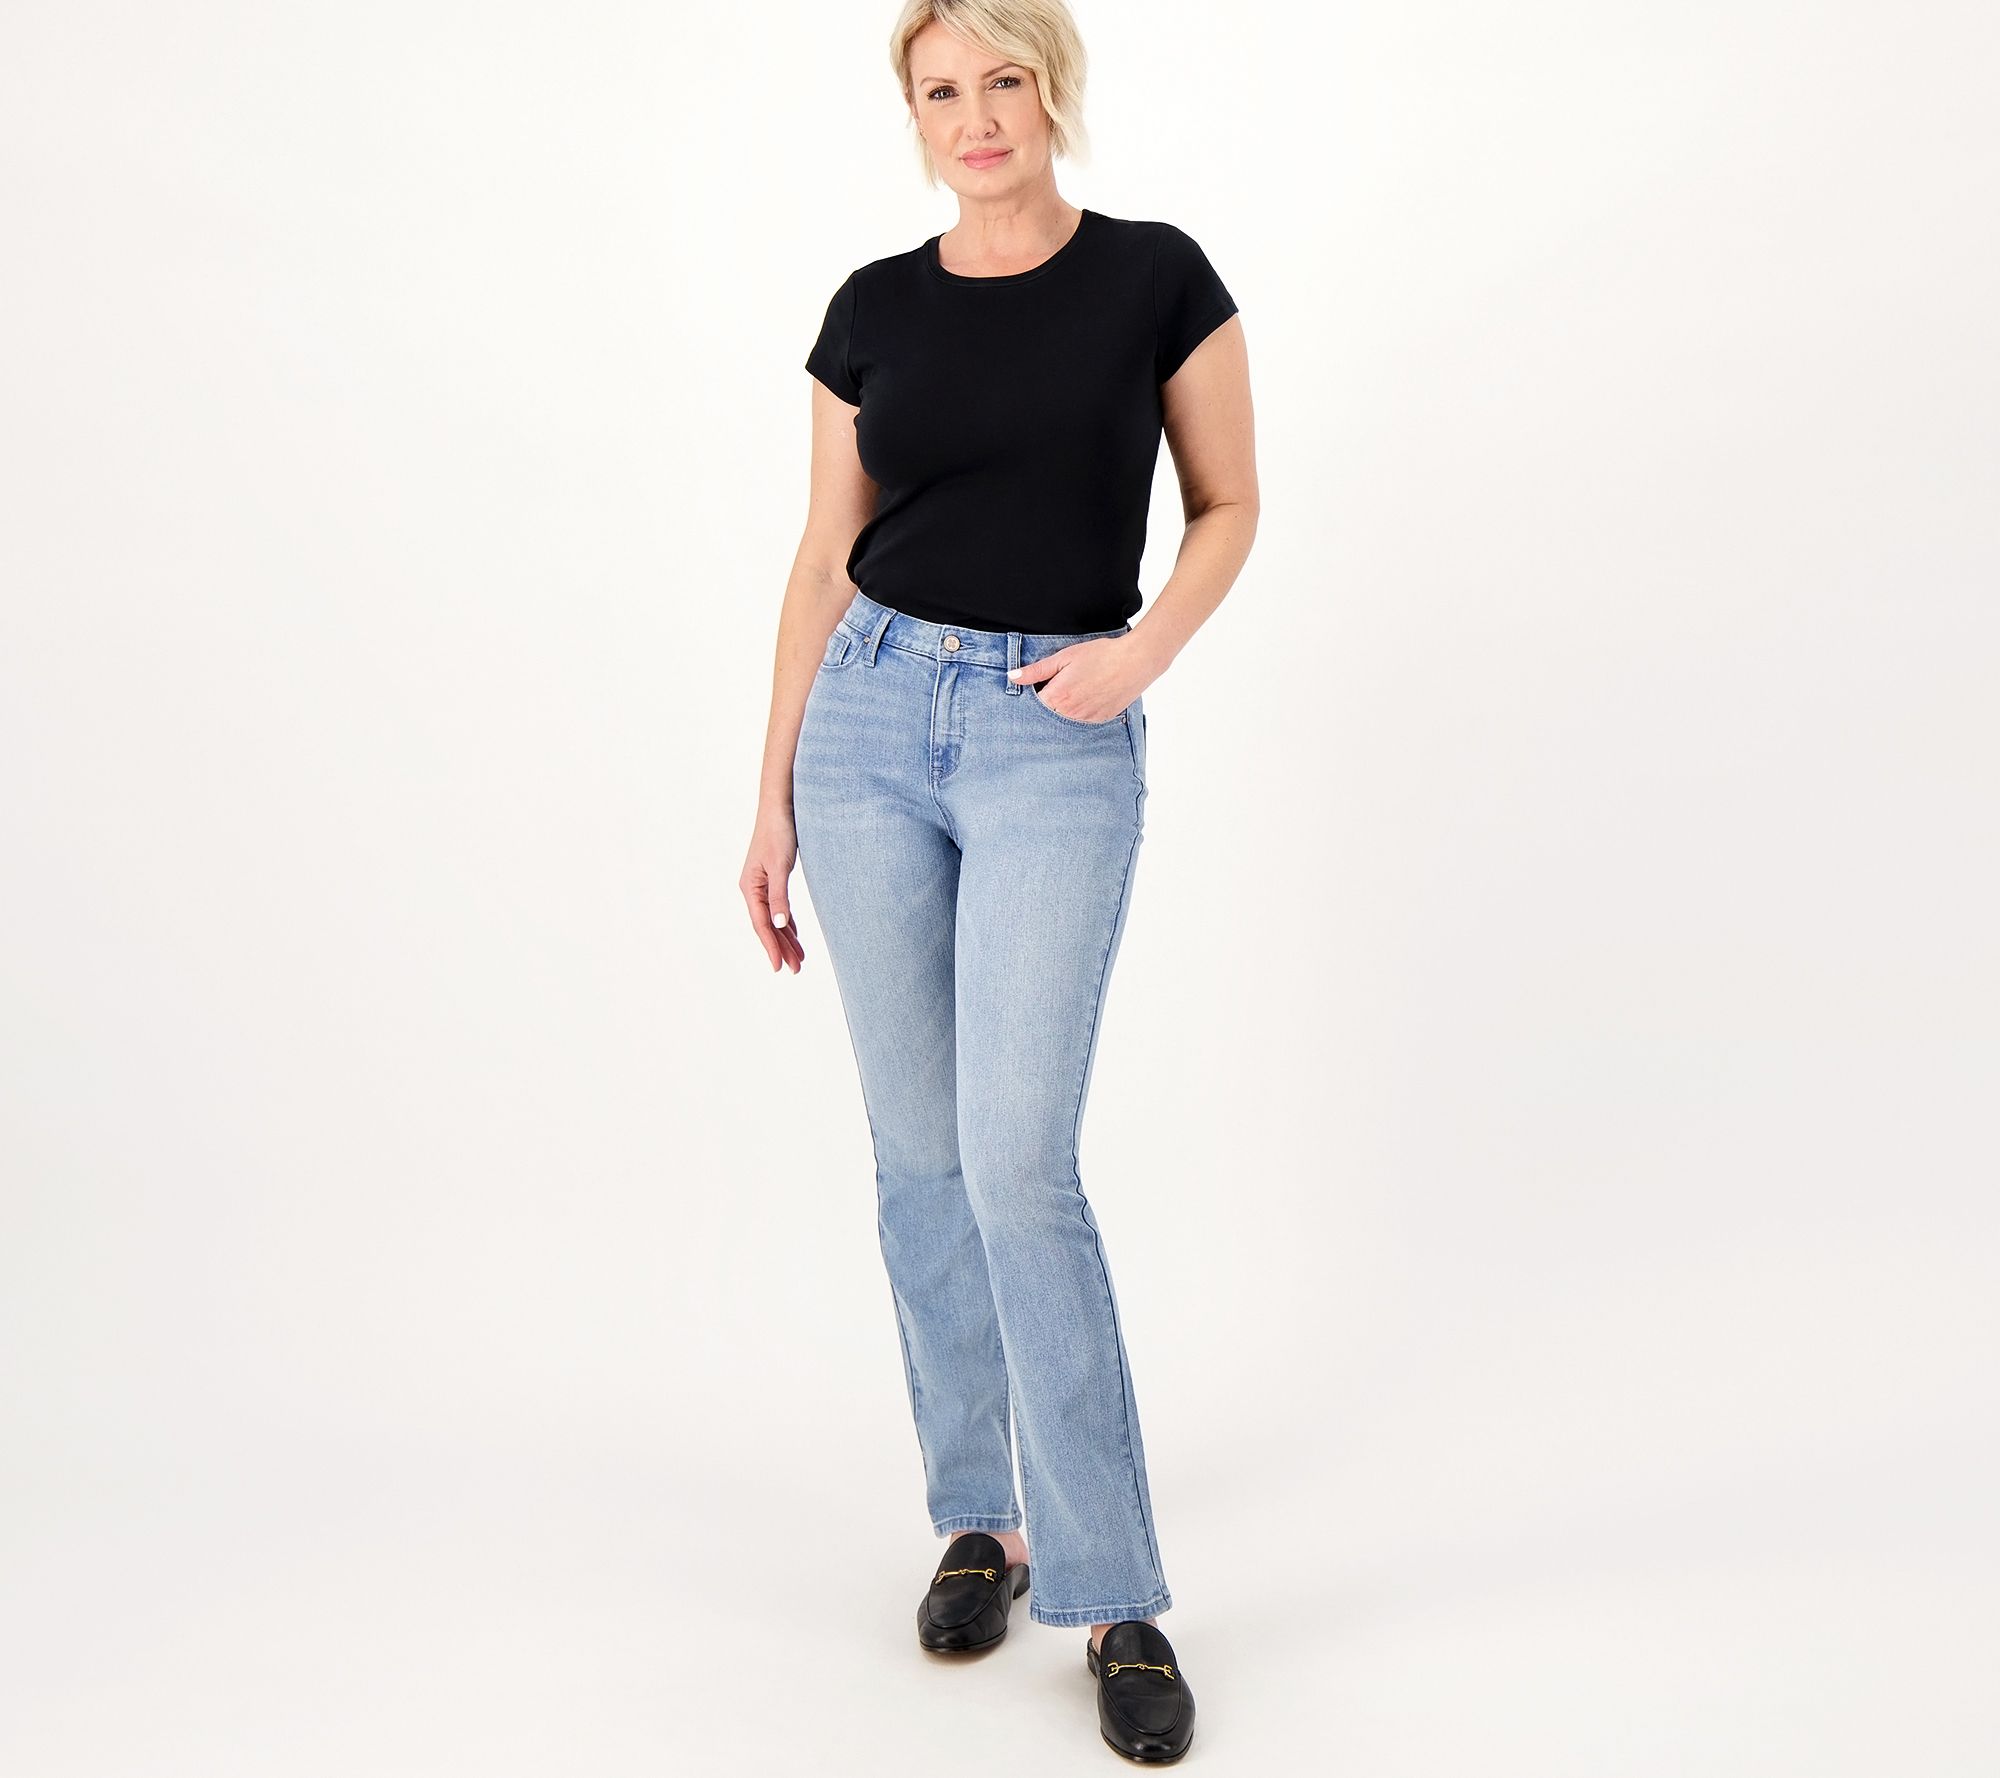 Laurie Felt Forever Denim 5 Pocket Relaxed Baby Bell Jeans - QVC.com